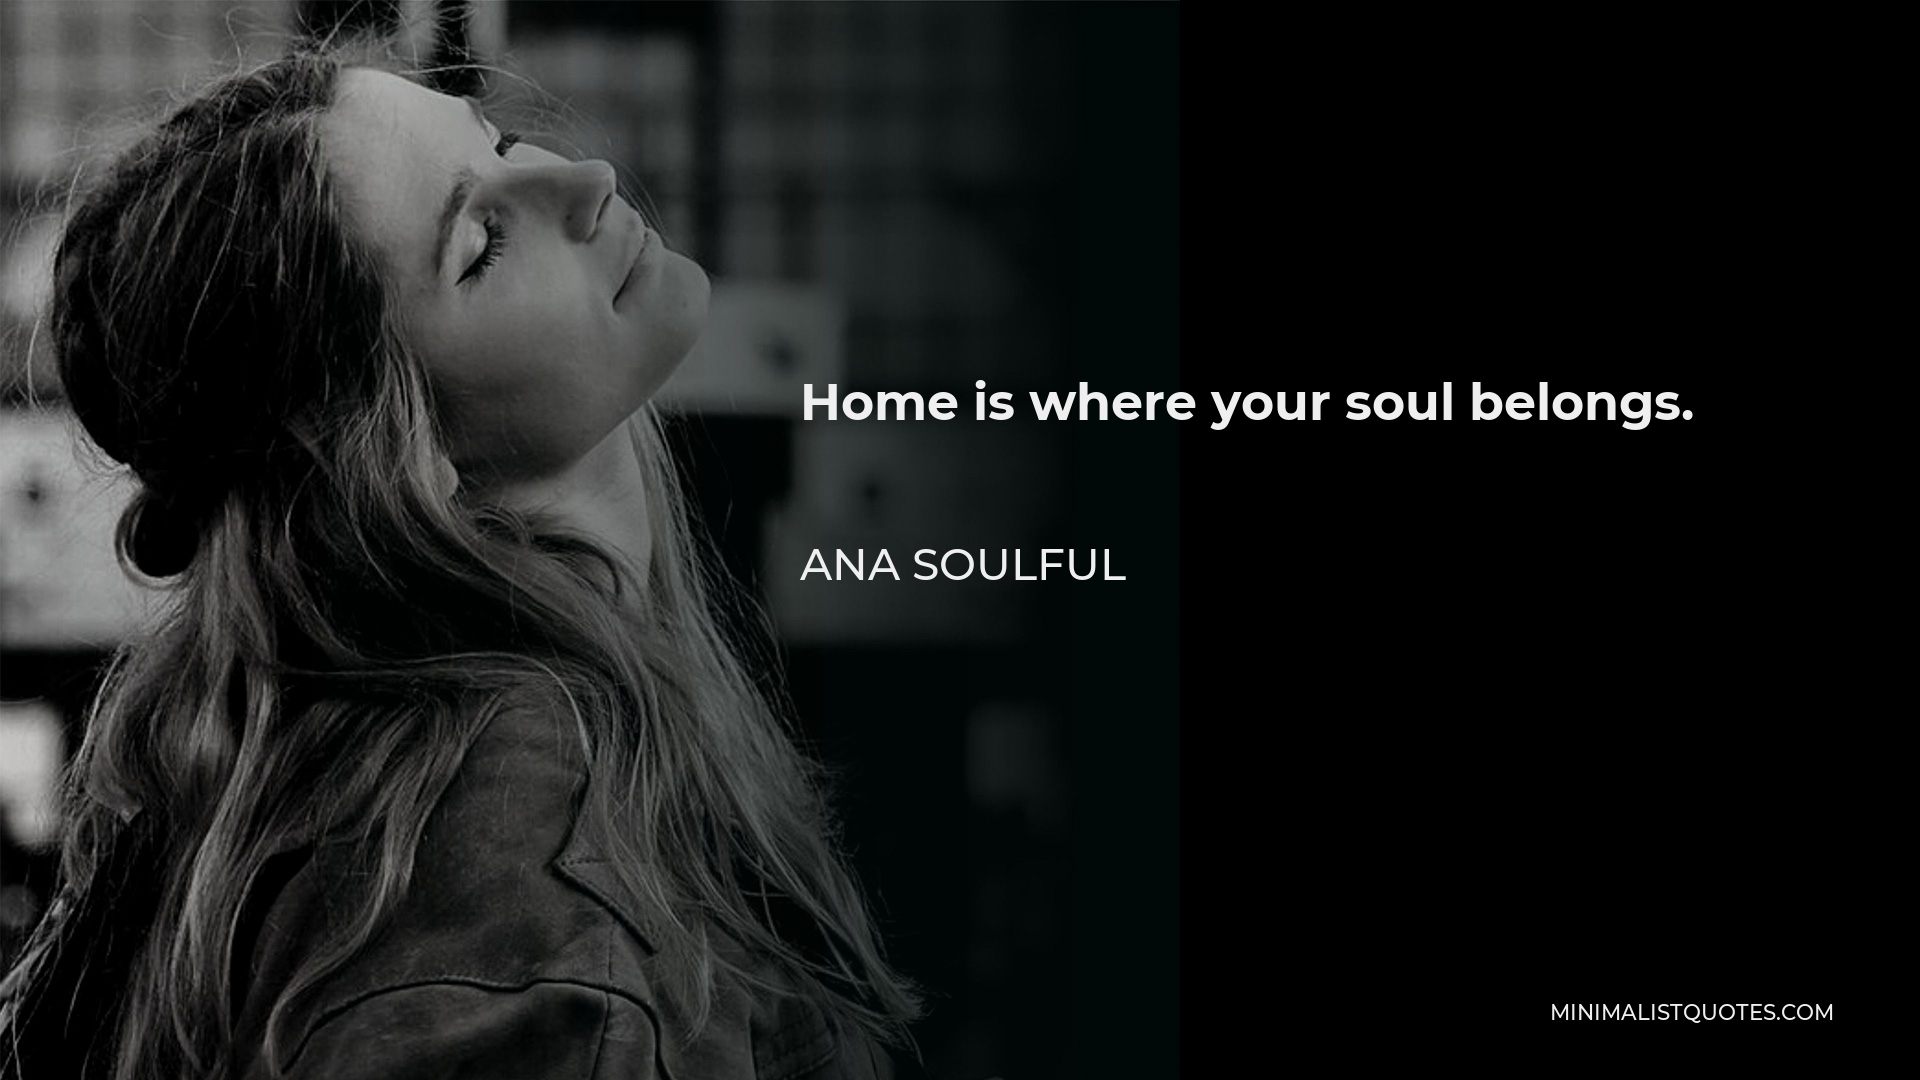 Ana Soulful Quote - Home is where your soul belongs.